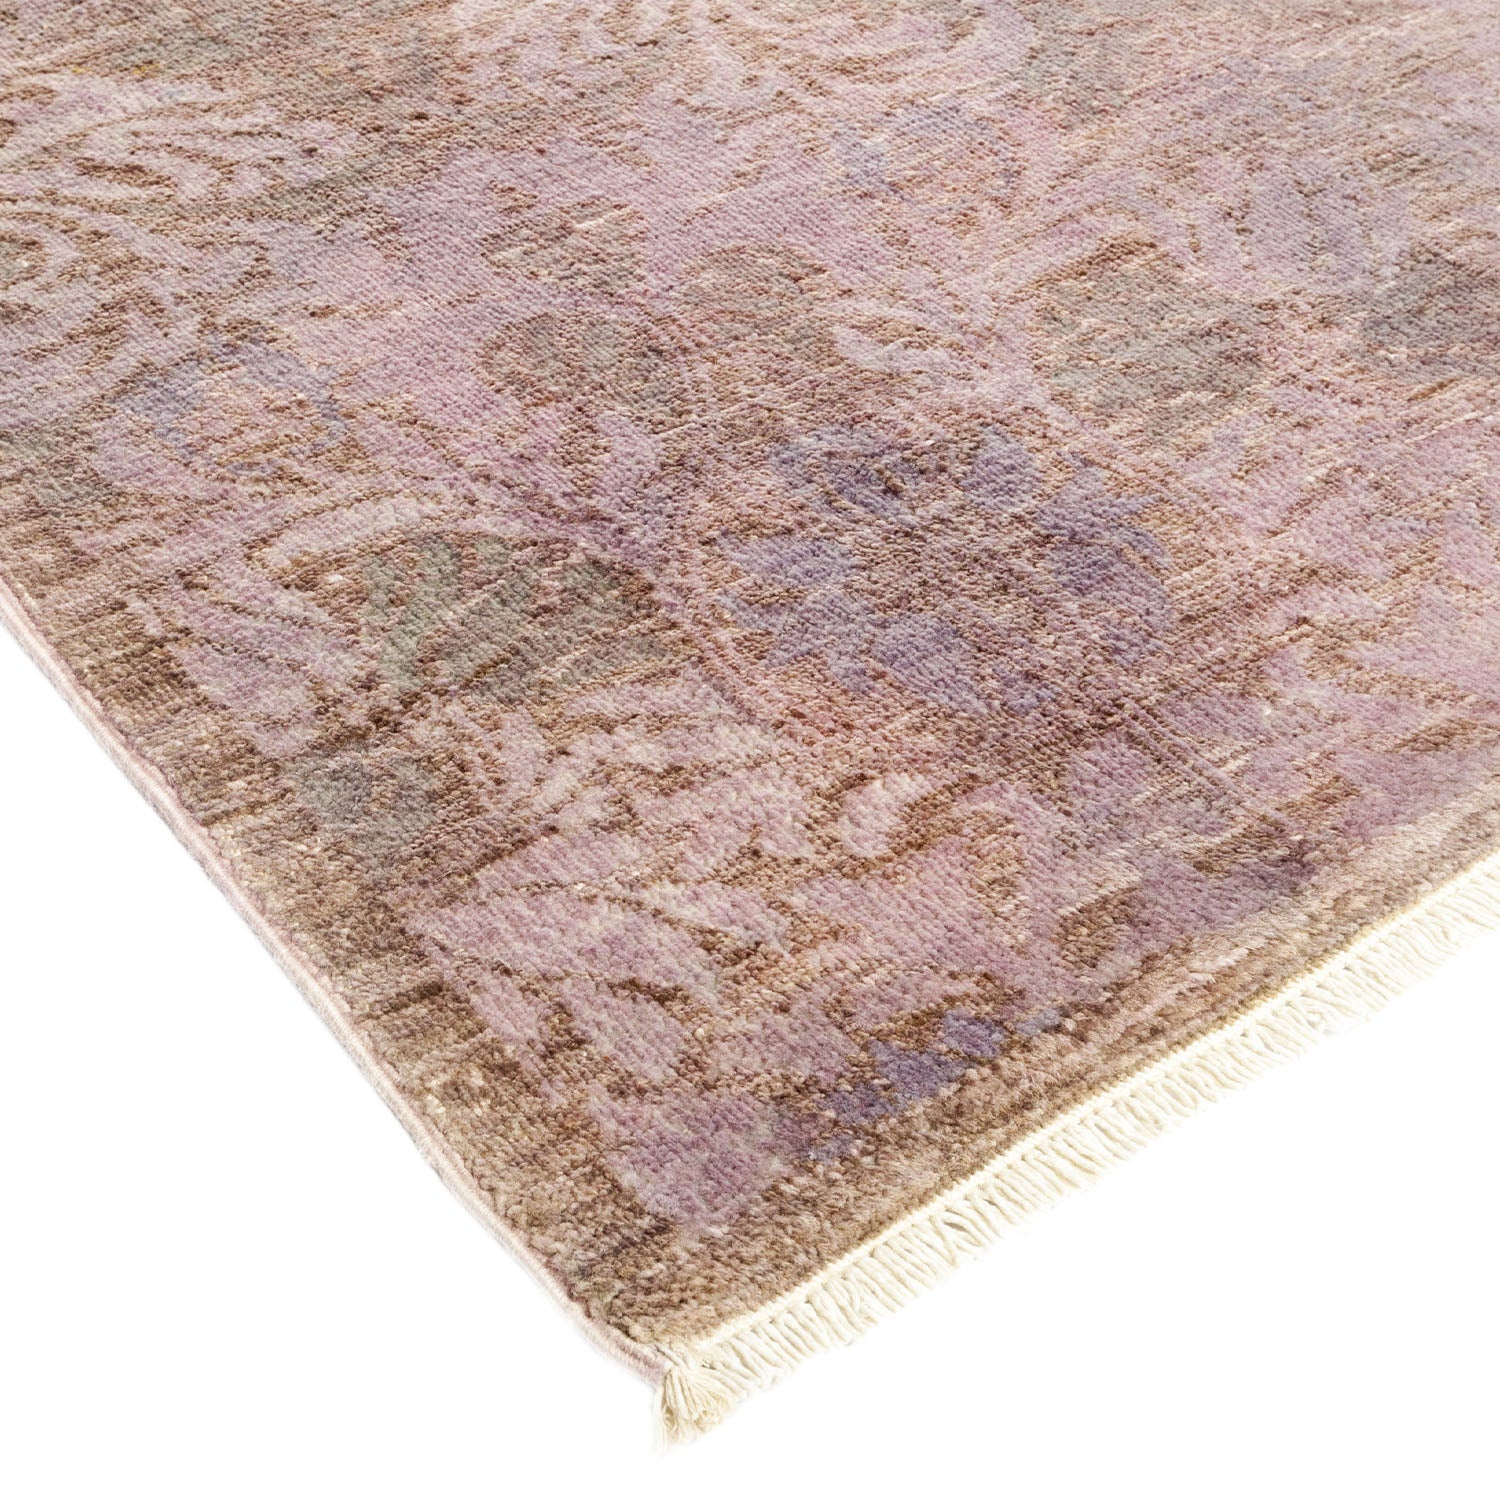 Intricate floral patterned rug with muted purple, beige, and blue.